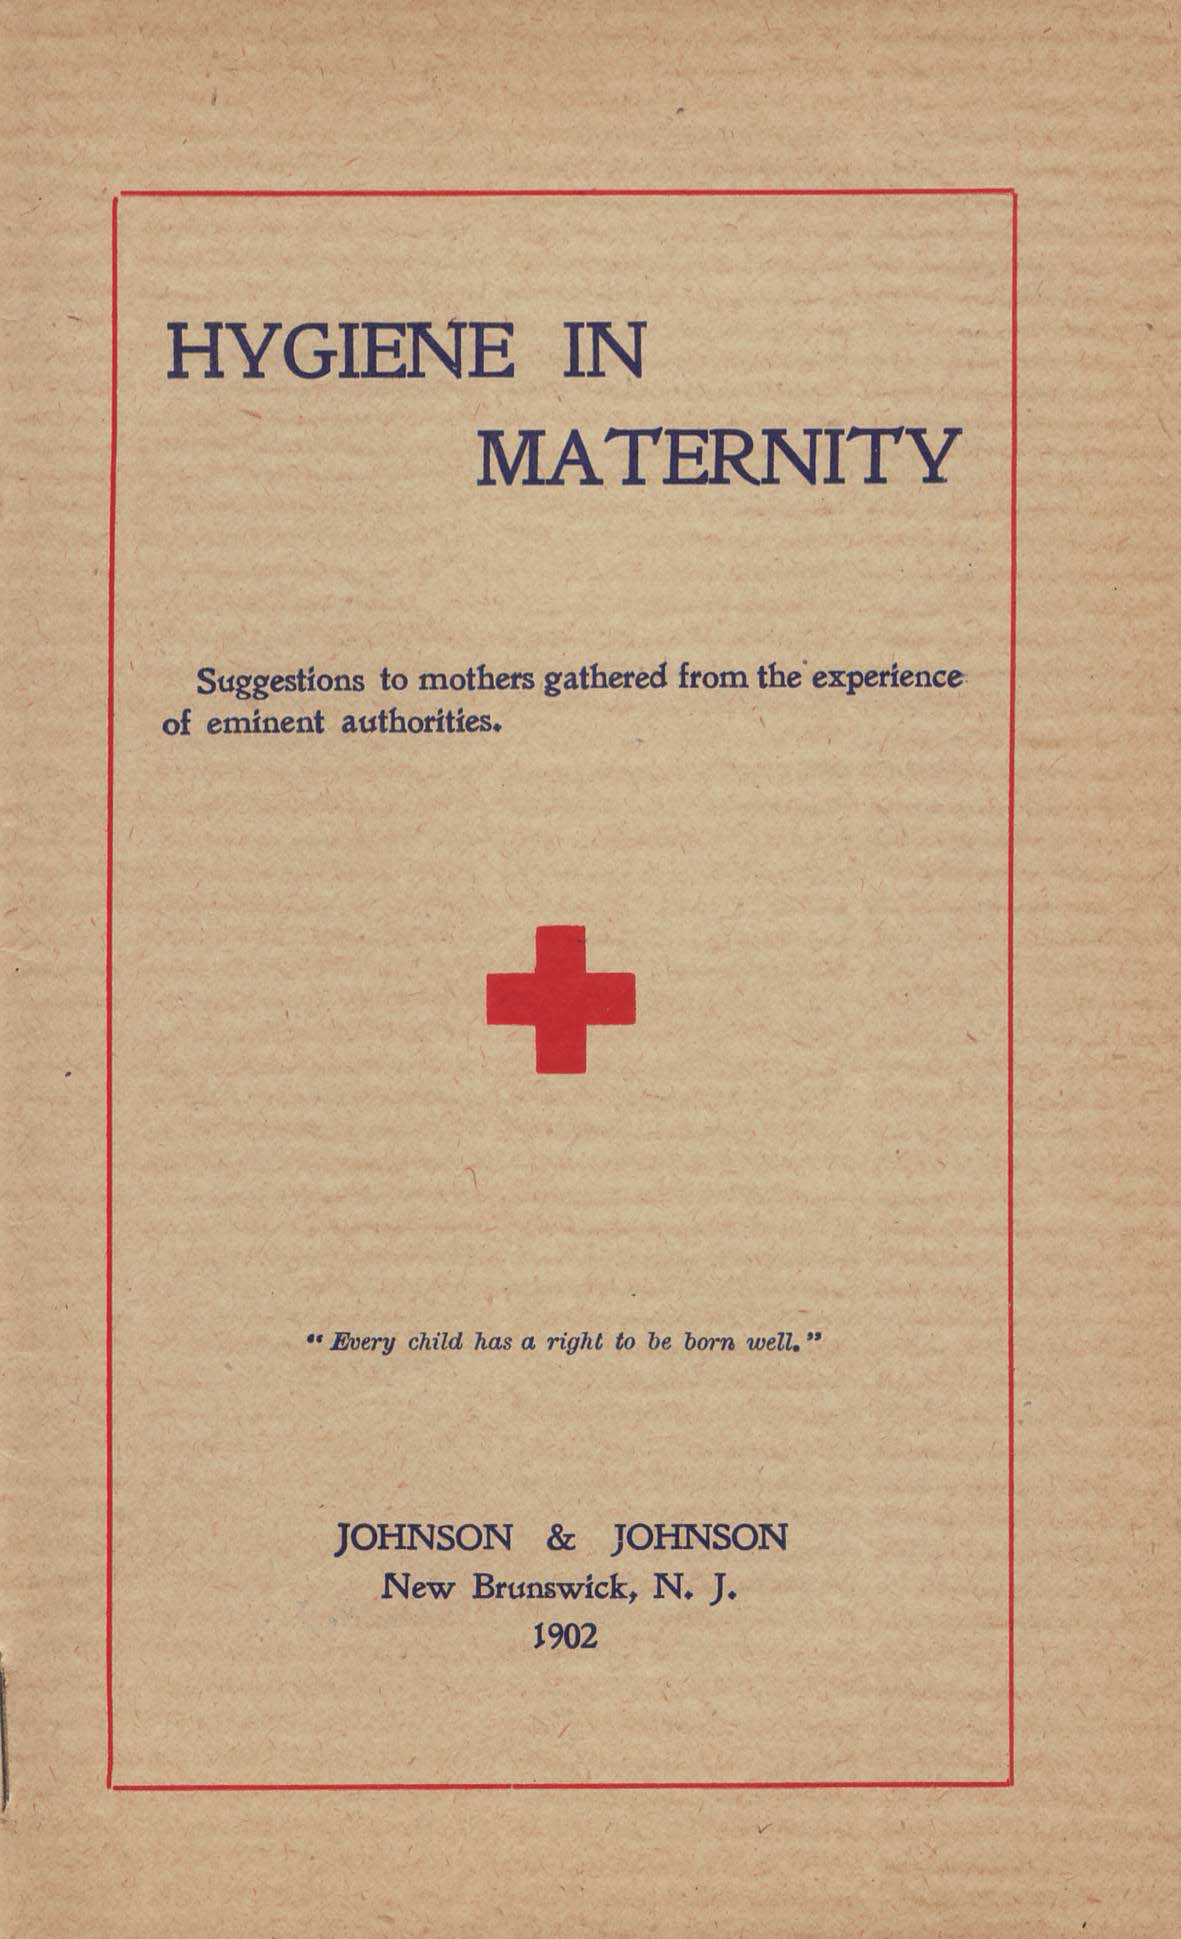 Cover of Hygiene in Maternity, 1902